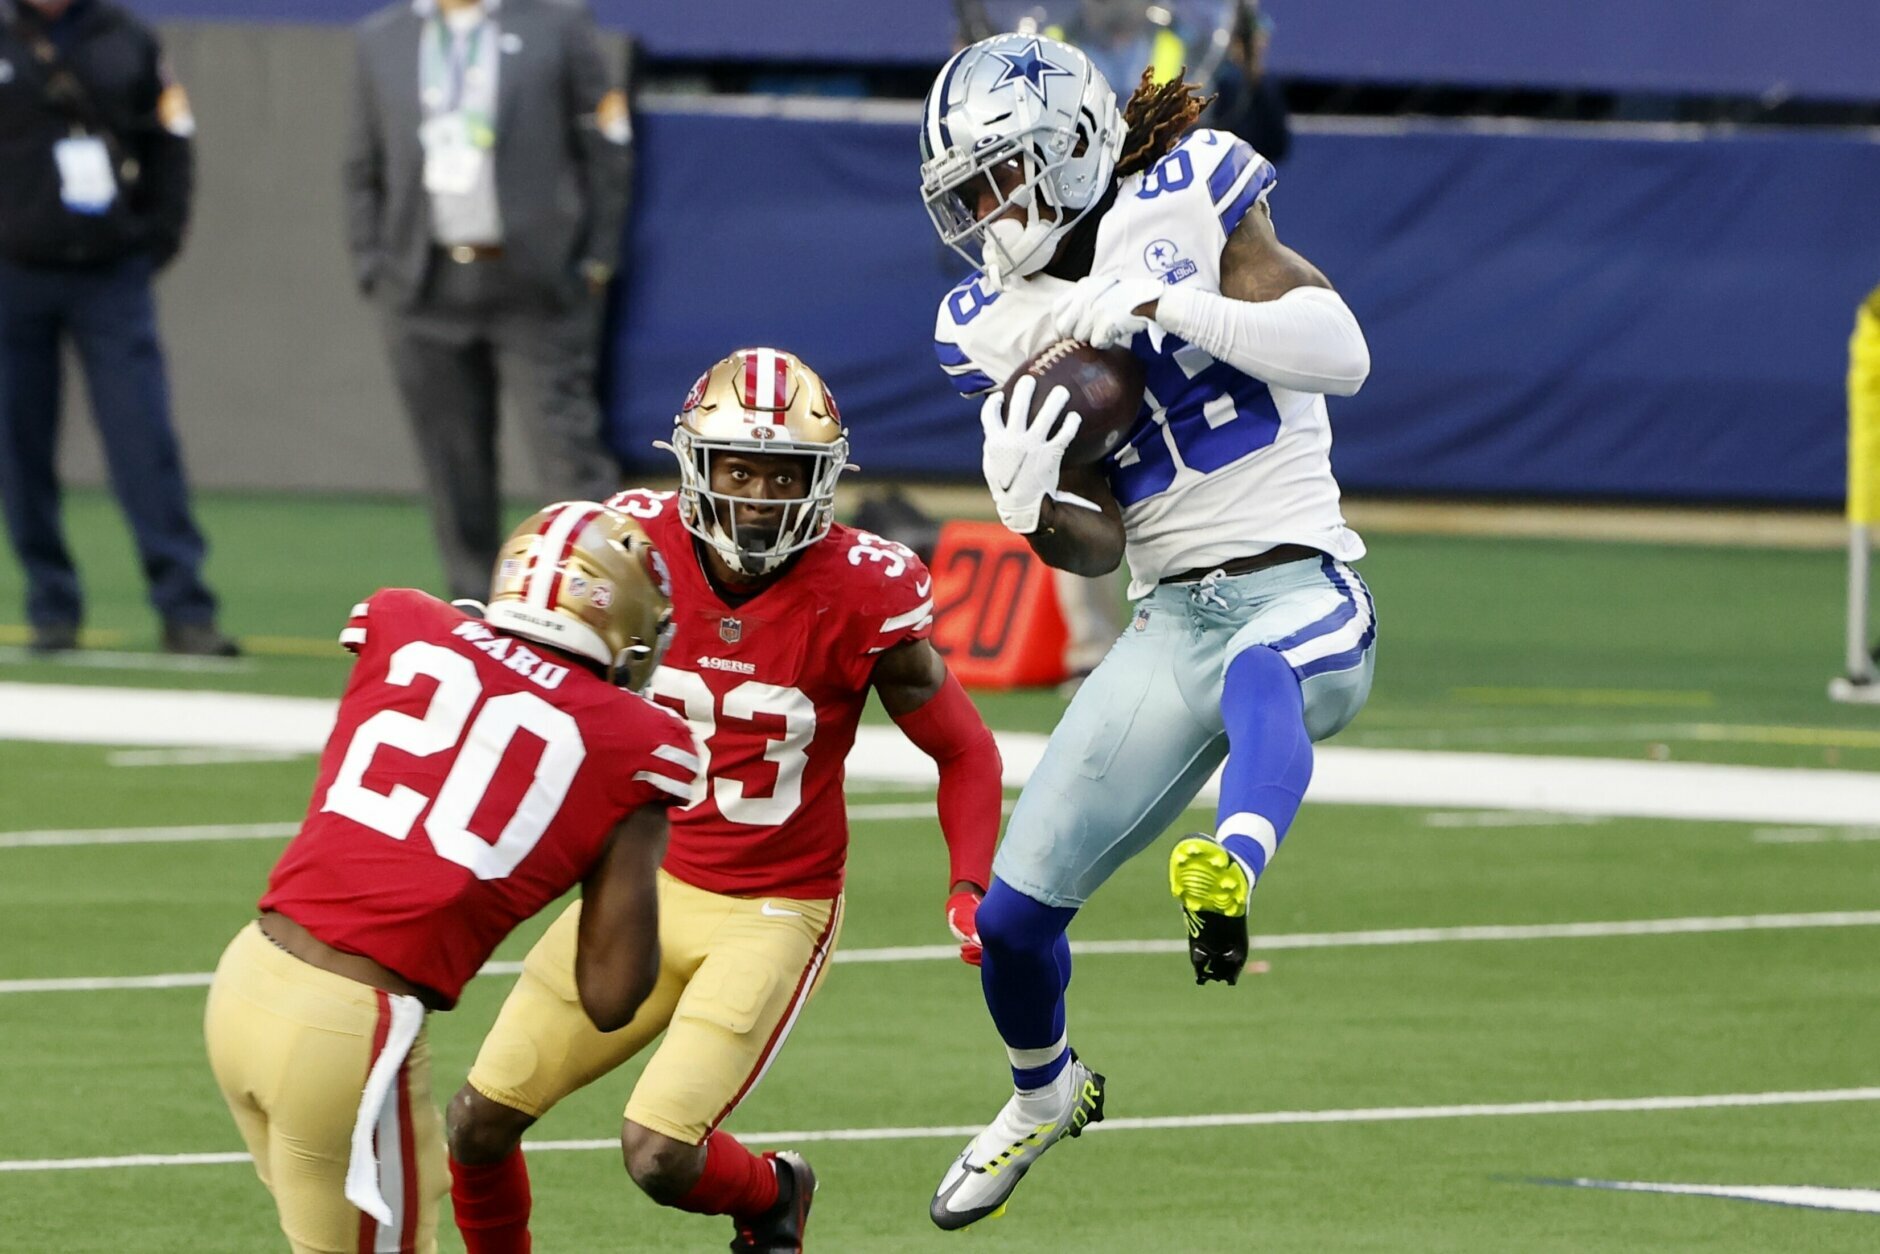 <p><b><i>49ers 33</i></b><br />
<b><i>Cowboys 41</i></b></p>
<p>Don&#8217;t let the score fool you: This was an embarrassing loss for Dallas. The Cowboys were flexed out of prime-time for the first time — and in favor of a division rival facing the Browns, no less — and only won because San Francisco essentially handed Dallas 24 points thanks to turnovers. Even as the rest of the NFC East lost on Sunday, they won in the long run because <a href="https://profootballtalk.nbcsports.com/2020/12/13/undeterred-by-week-15-flex-jerry-jones-says-cowboys-are-the-premier-draw-in-television-period/">Jerry Jones&#8217; delusions about his sagging franchise</a> only grew stronger.</p>
